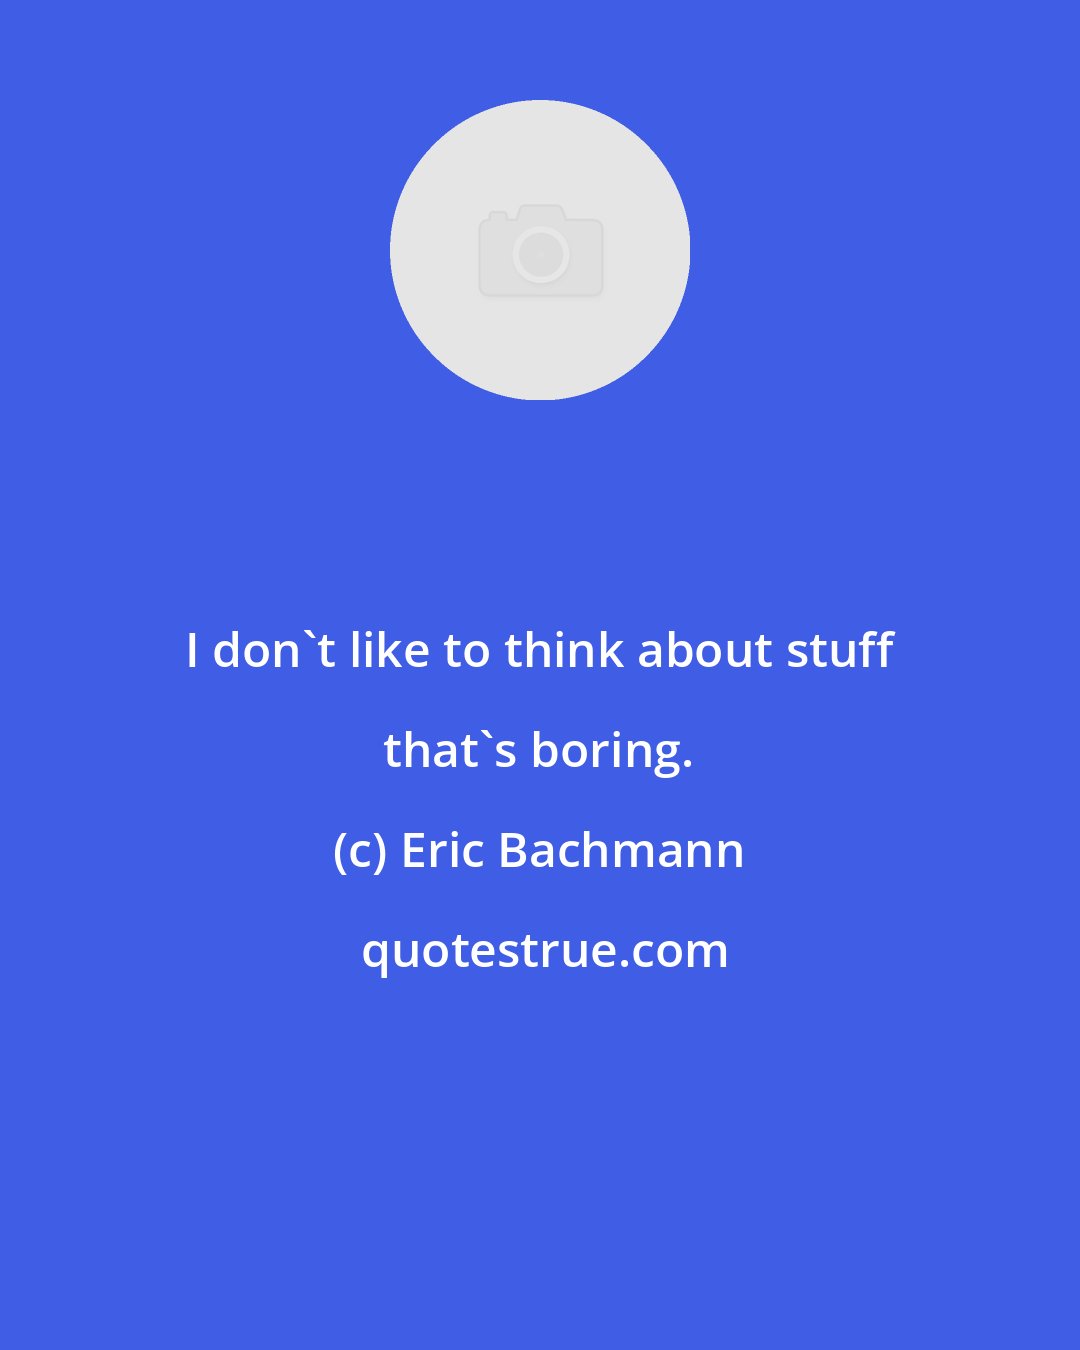 Eric Bachmann: I don't like to think about stuff that's boring.